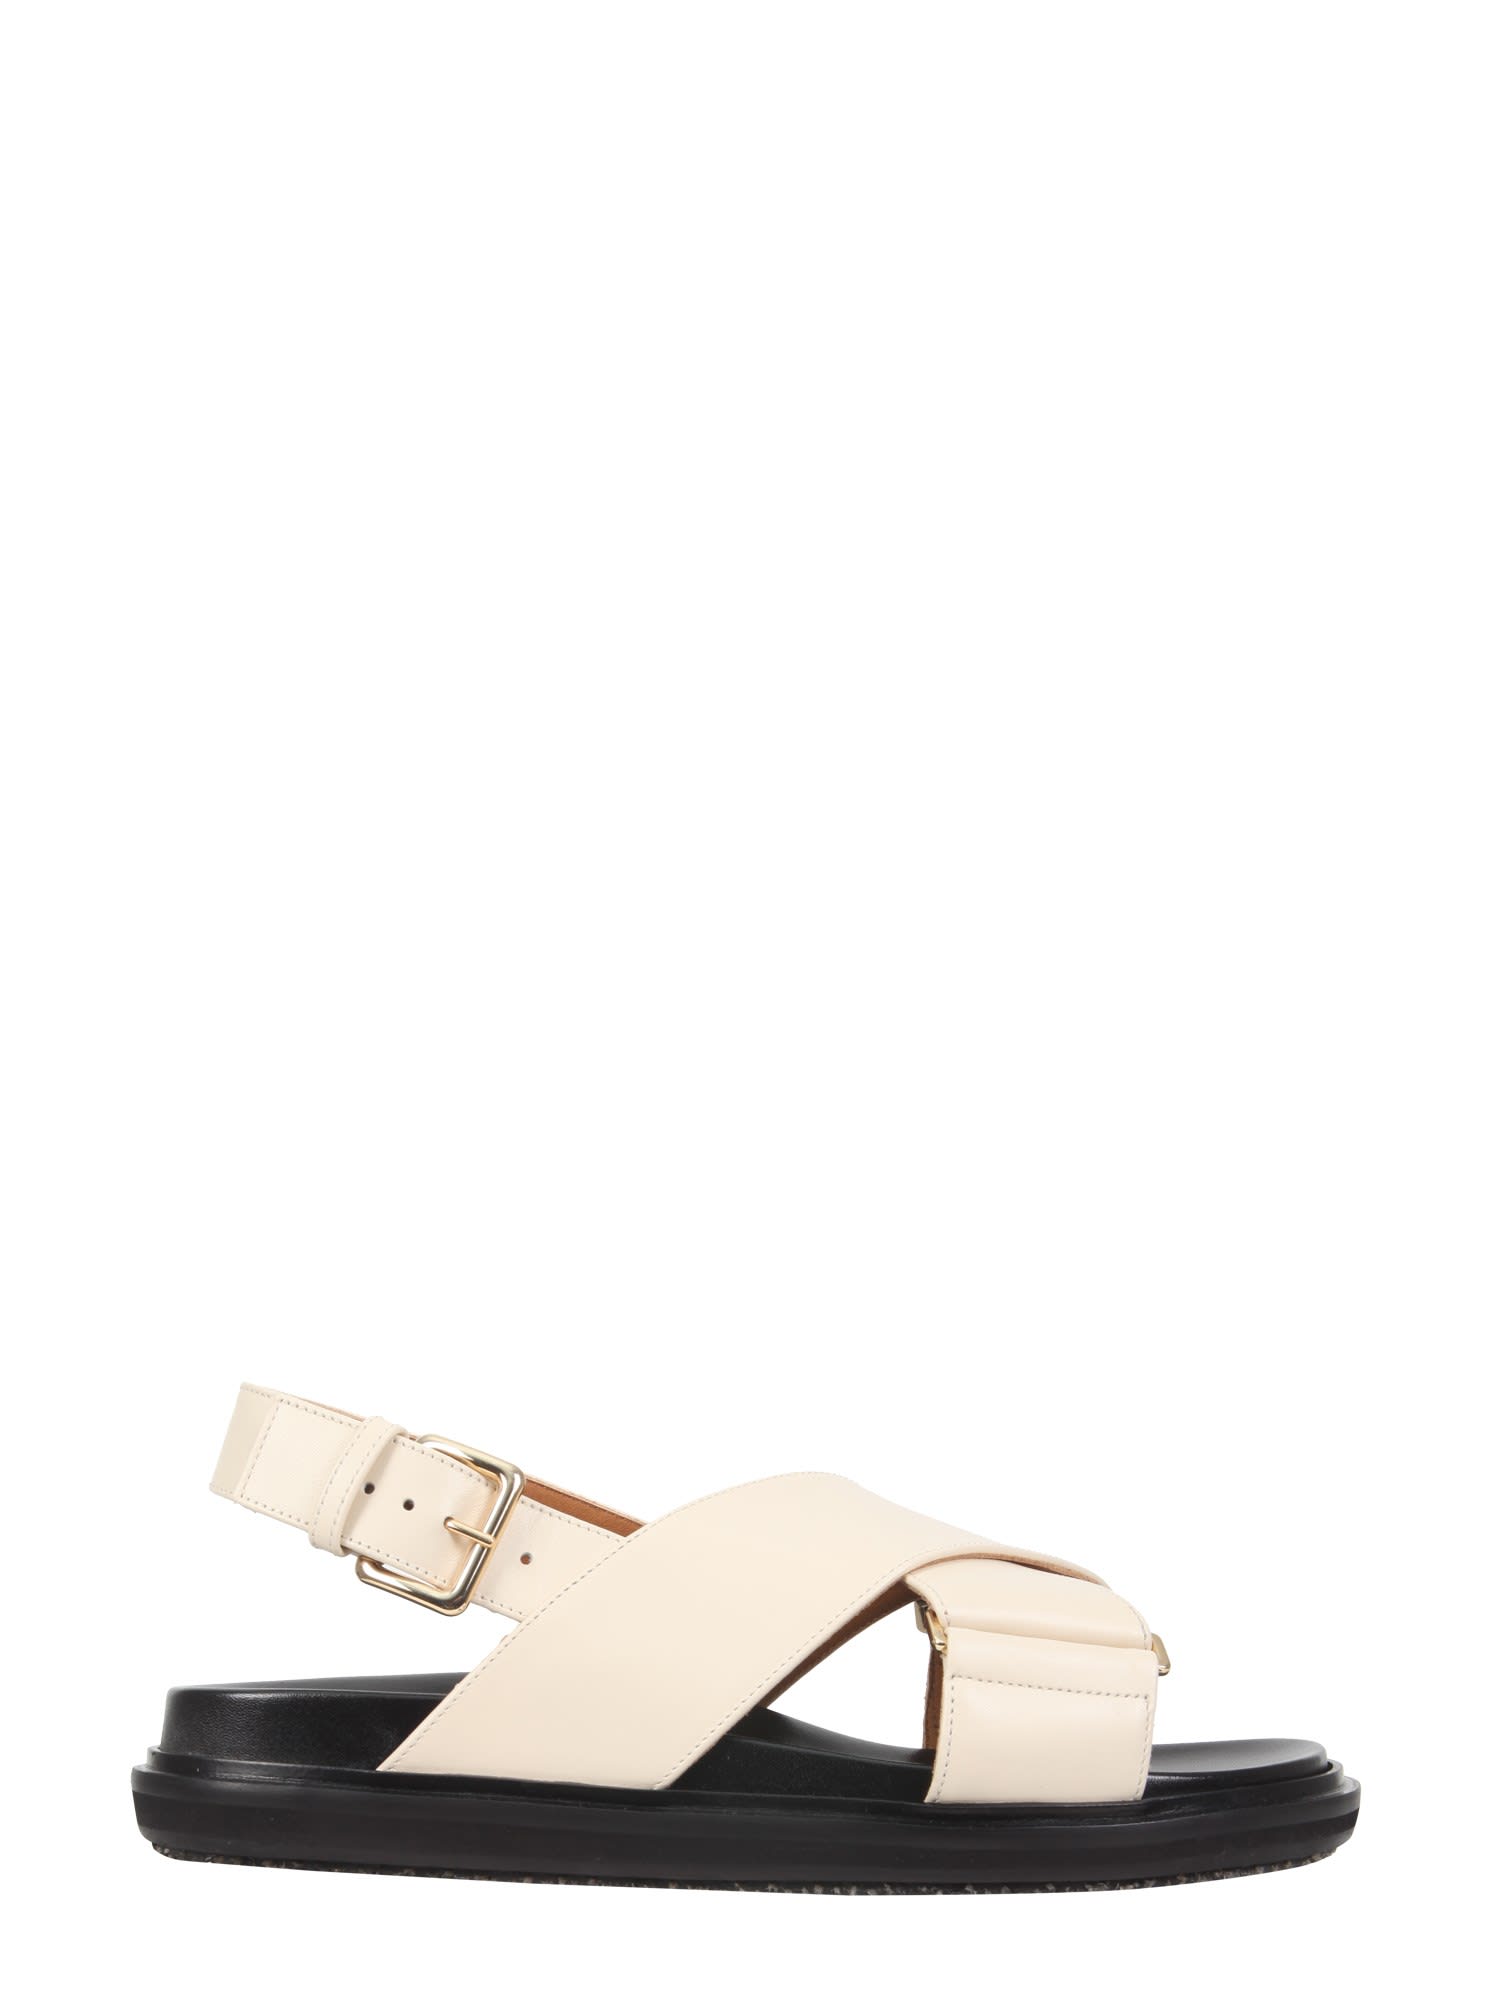 Buy Marni Crossover Sandals online, shop Marni shoes with free shipping